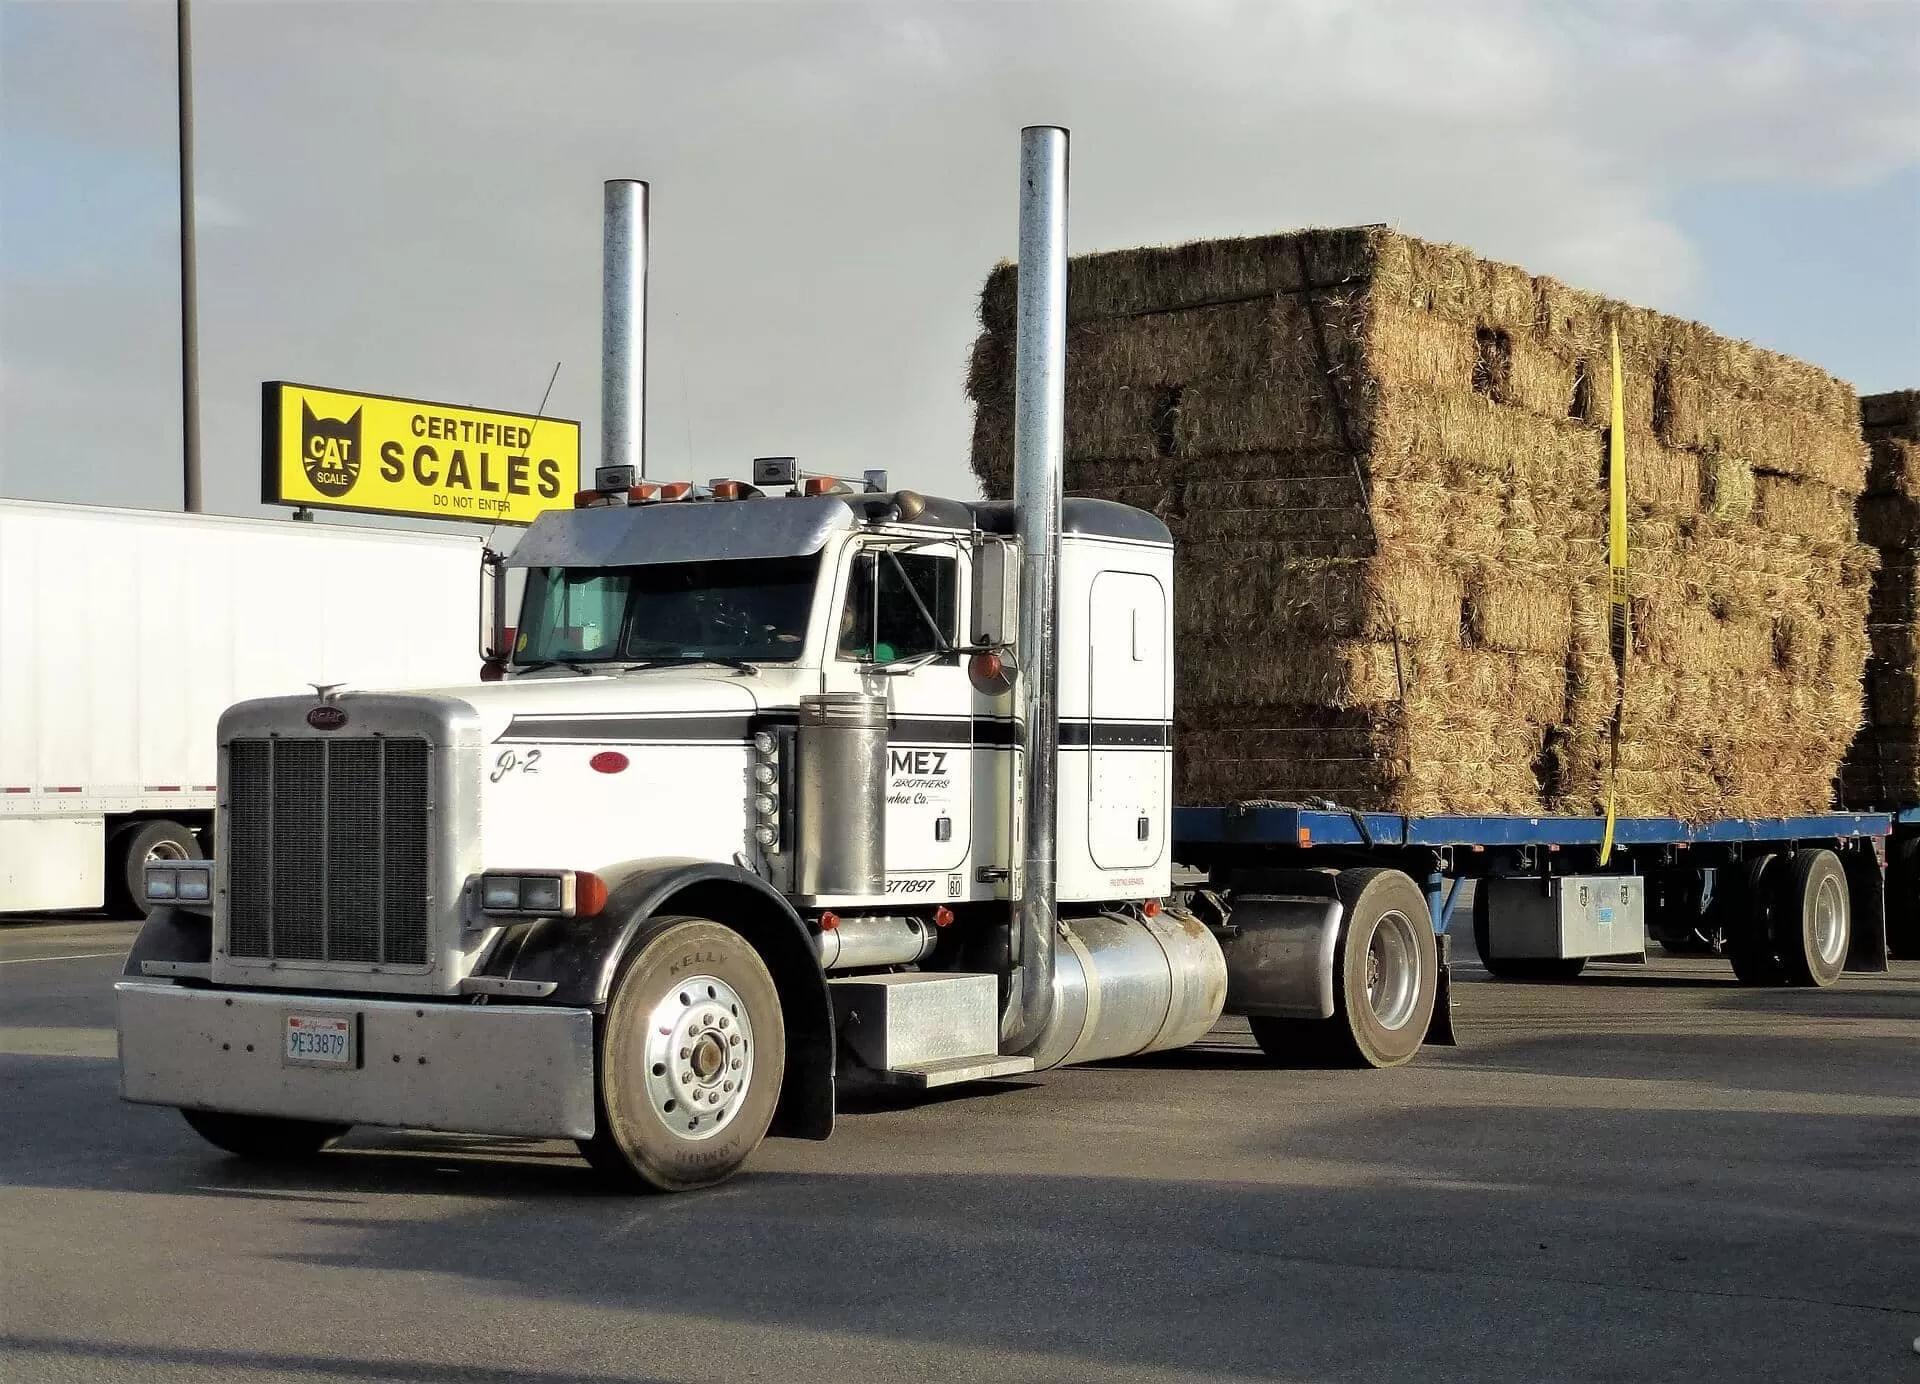 Truck loaded with hay